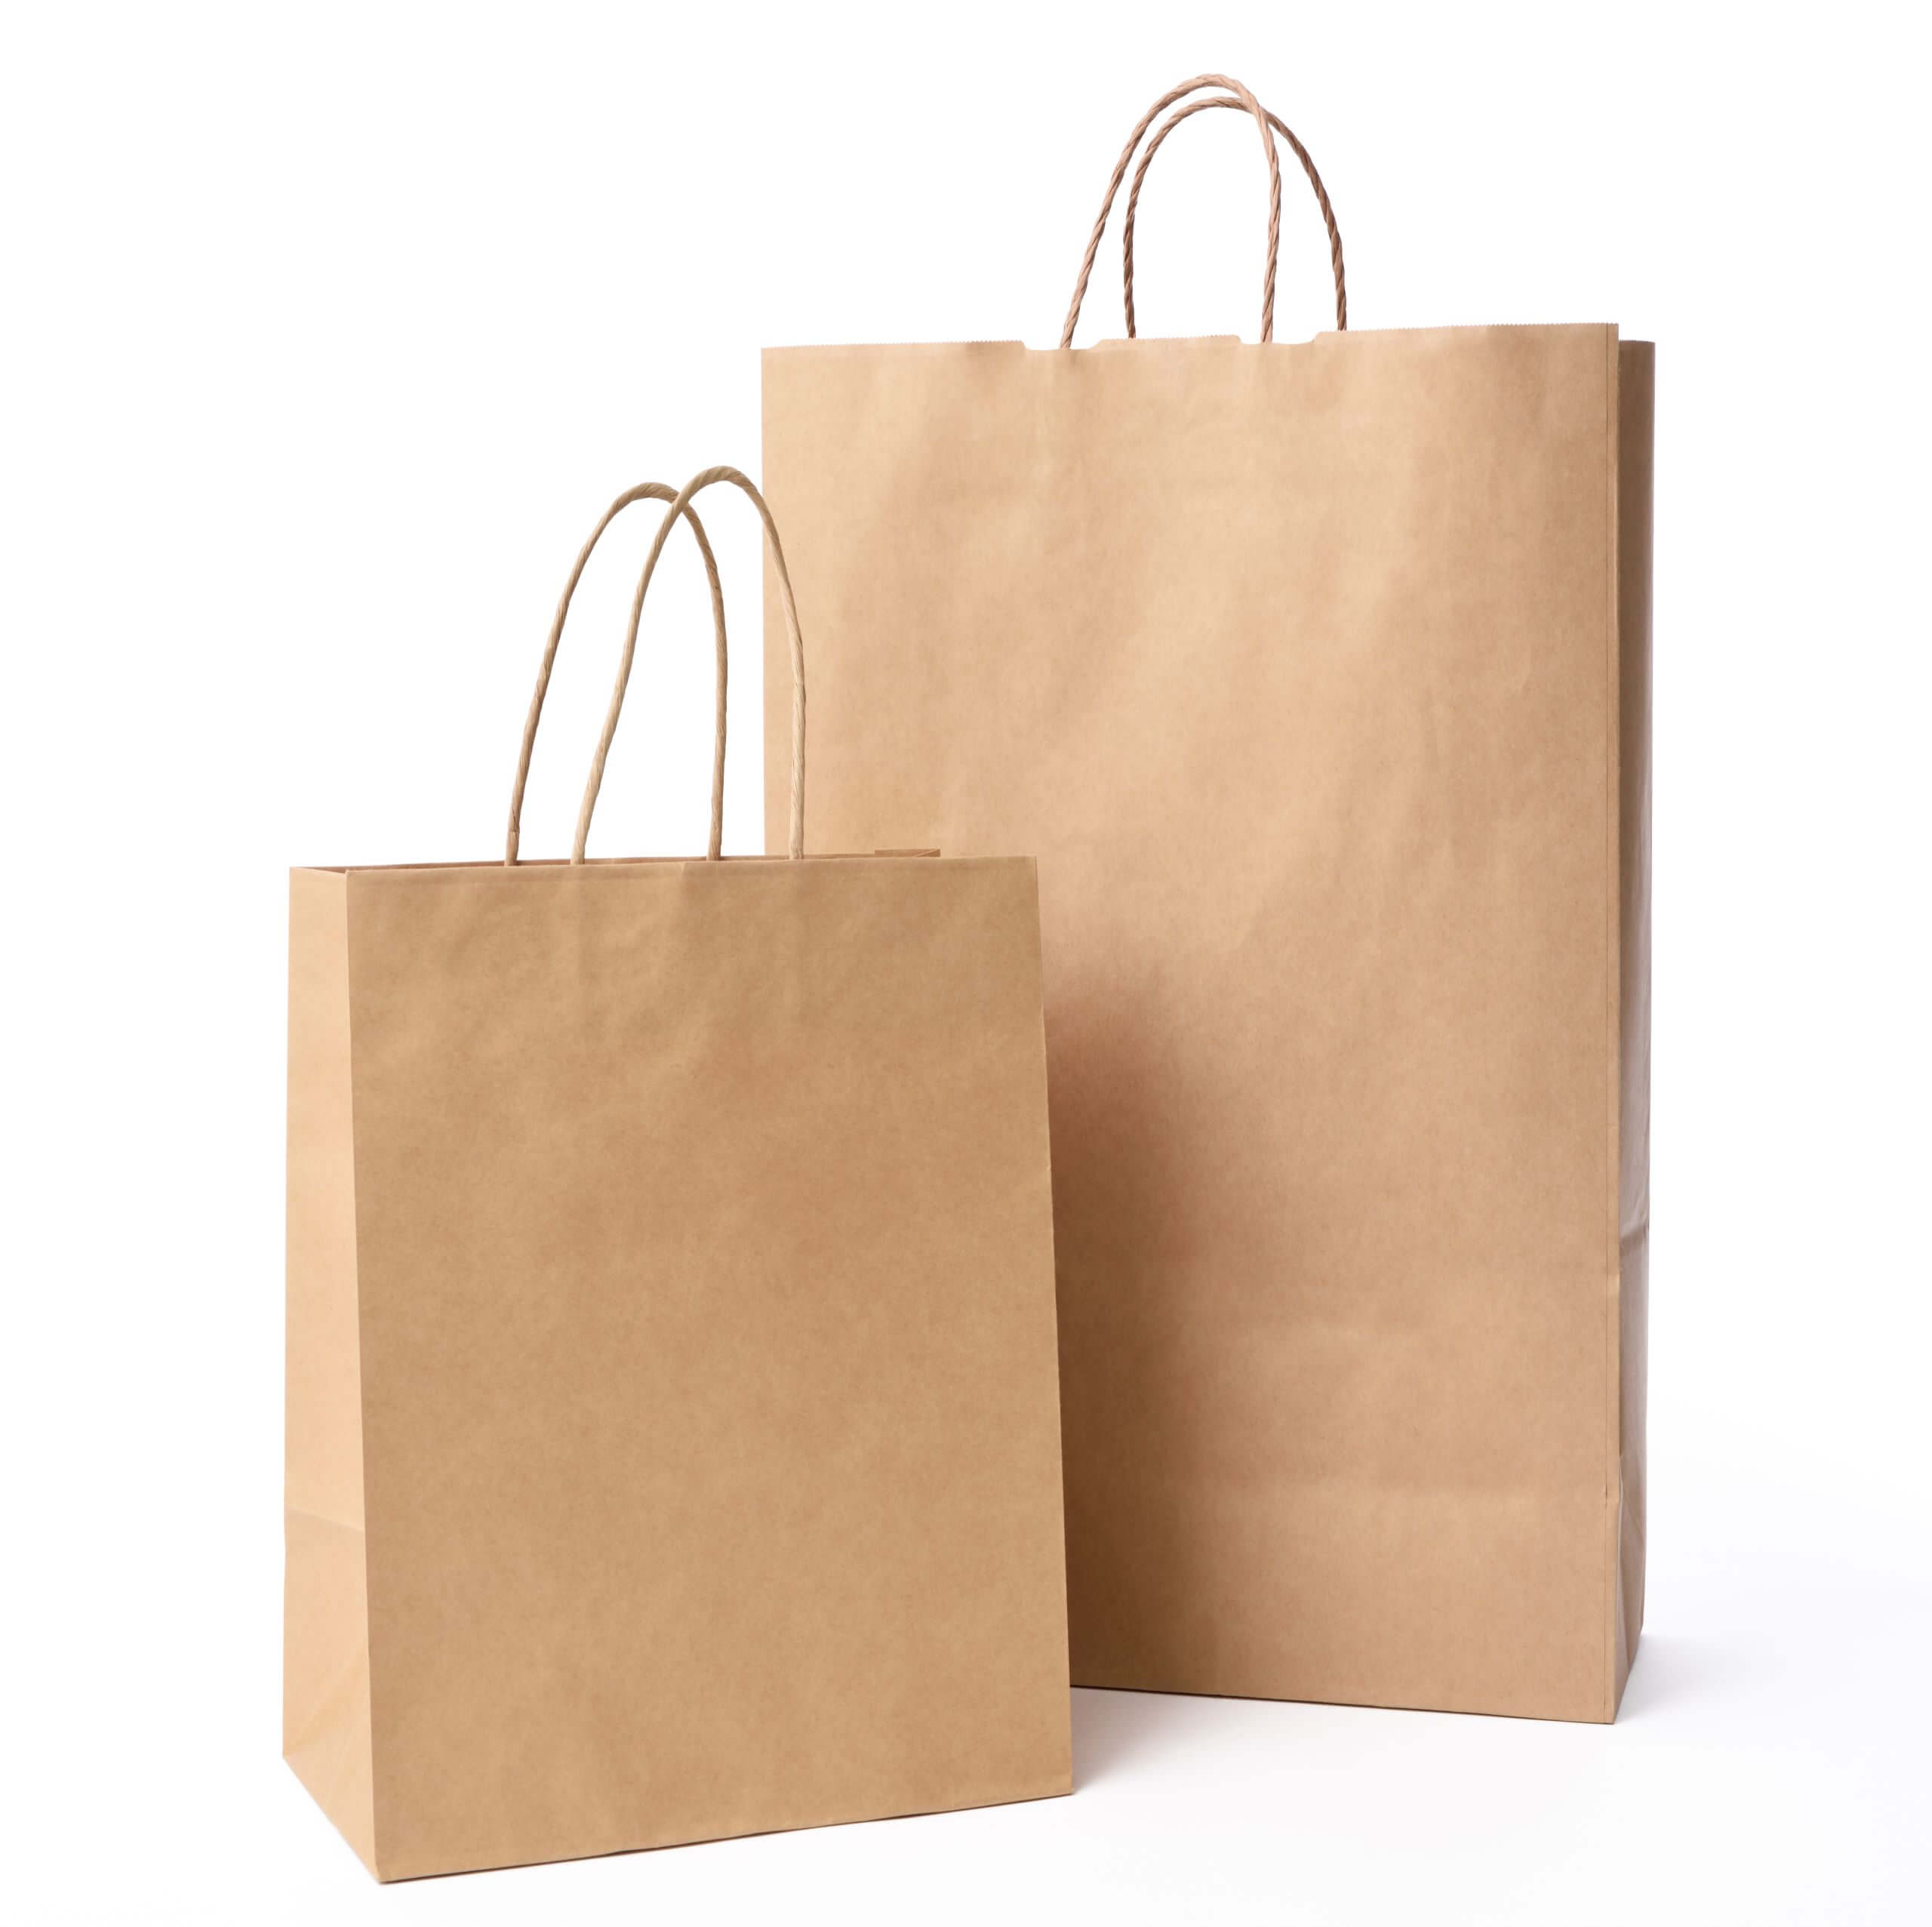 An image of our String Handled Paper Bags.